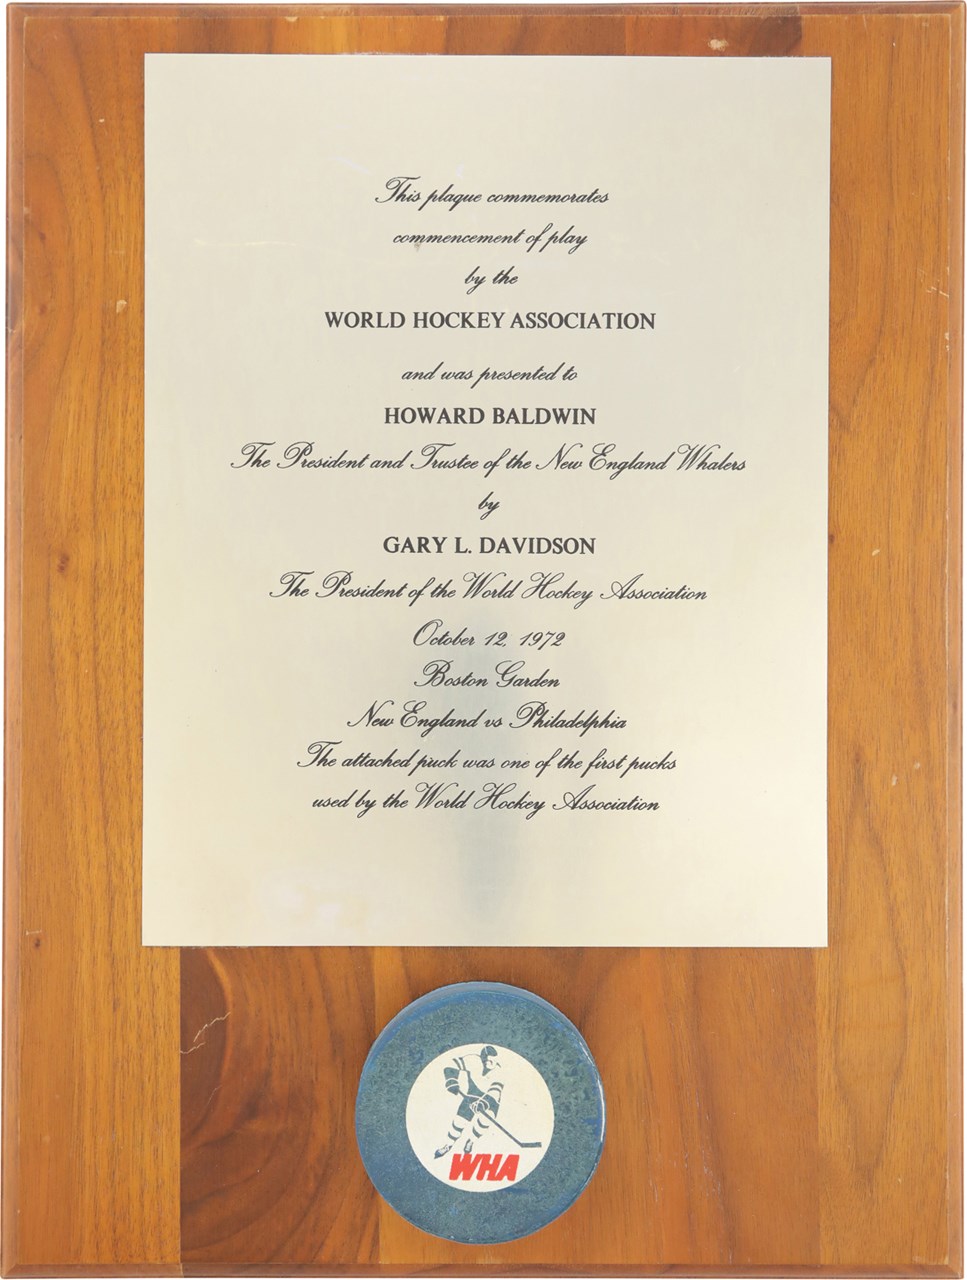 Hockey - 10/12/72 WHA Commencement of Play Award